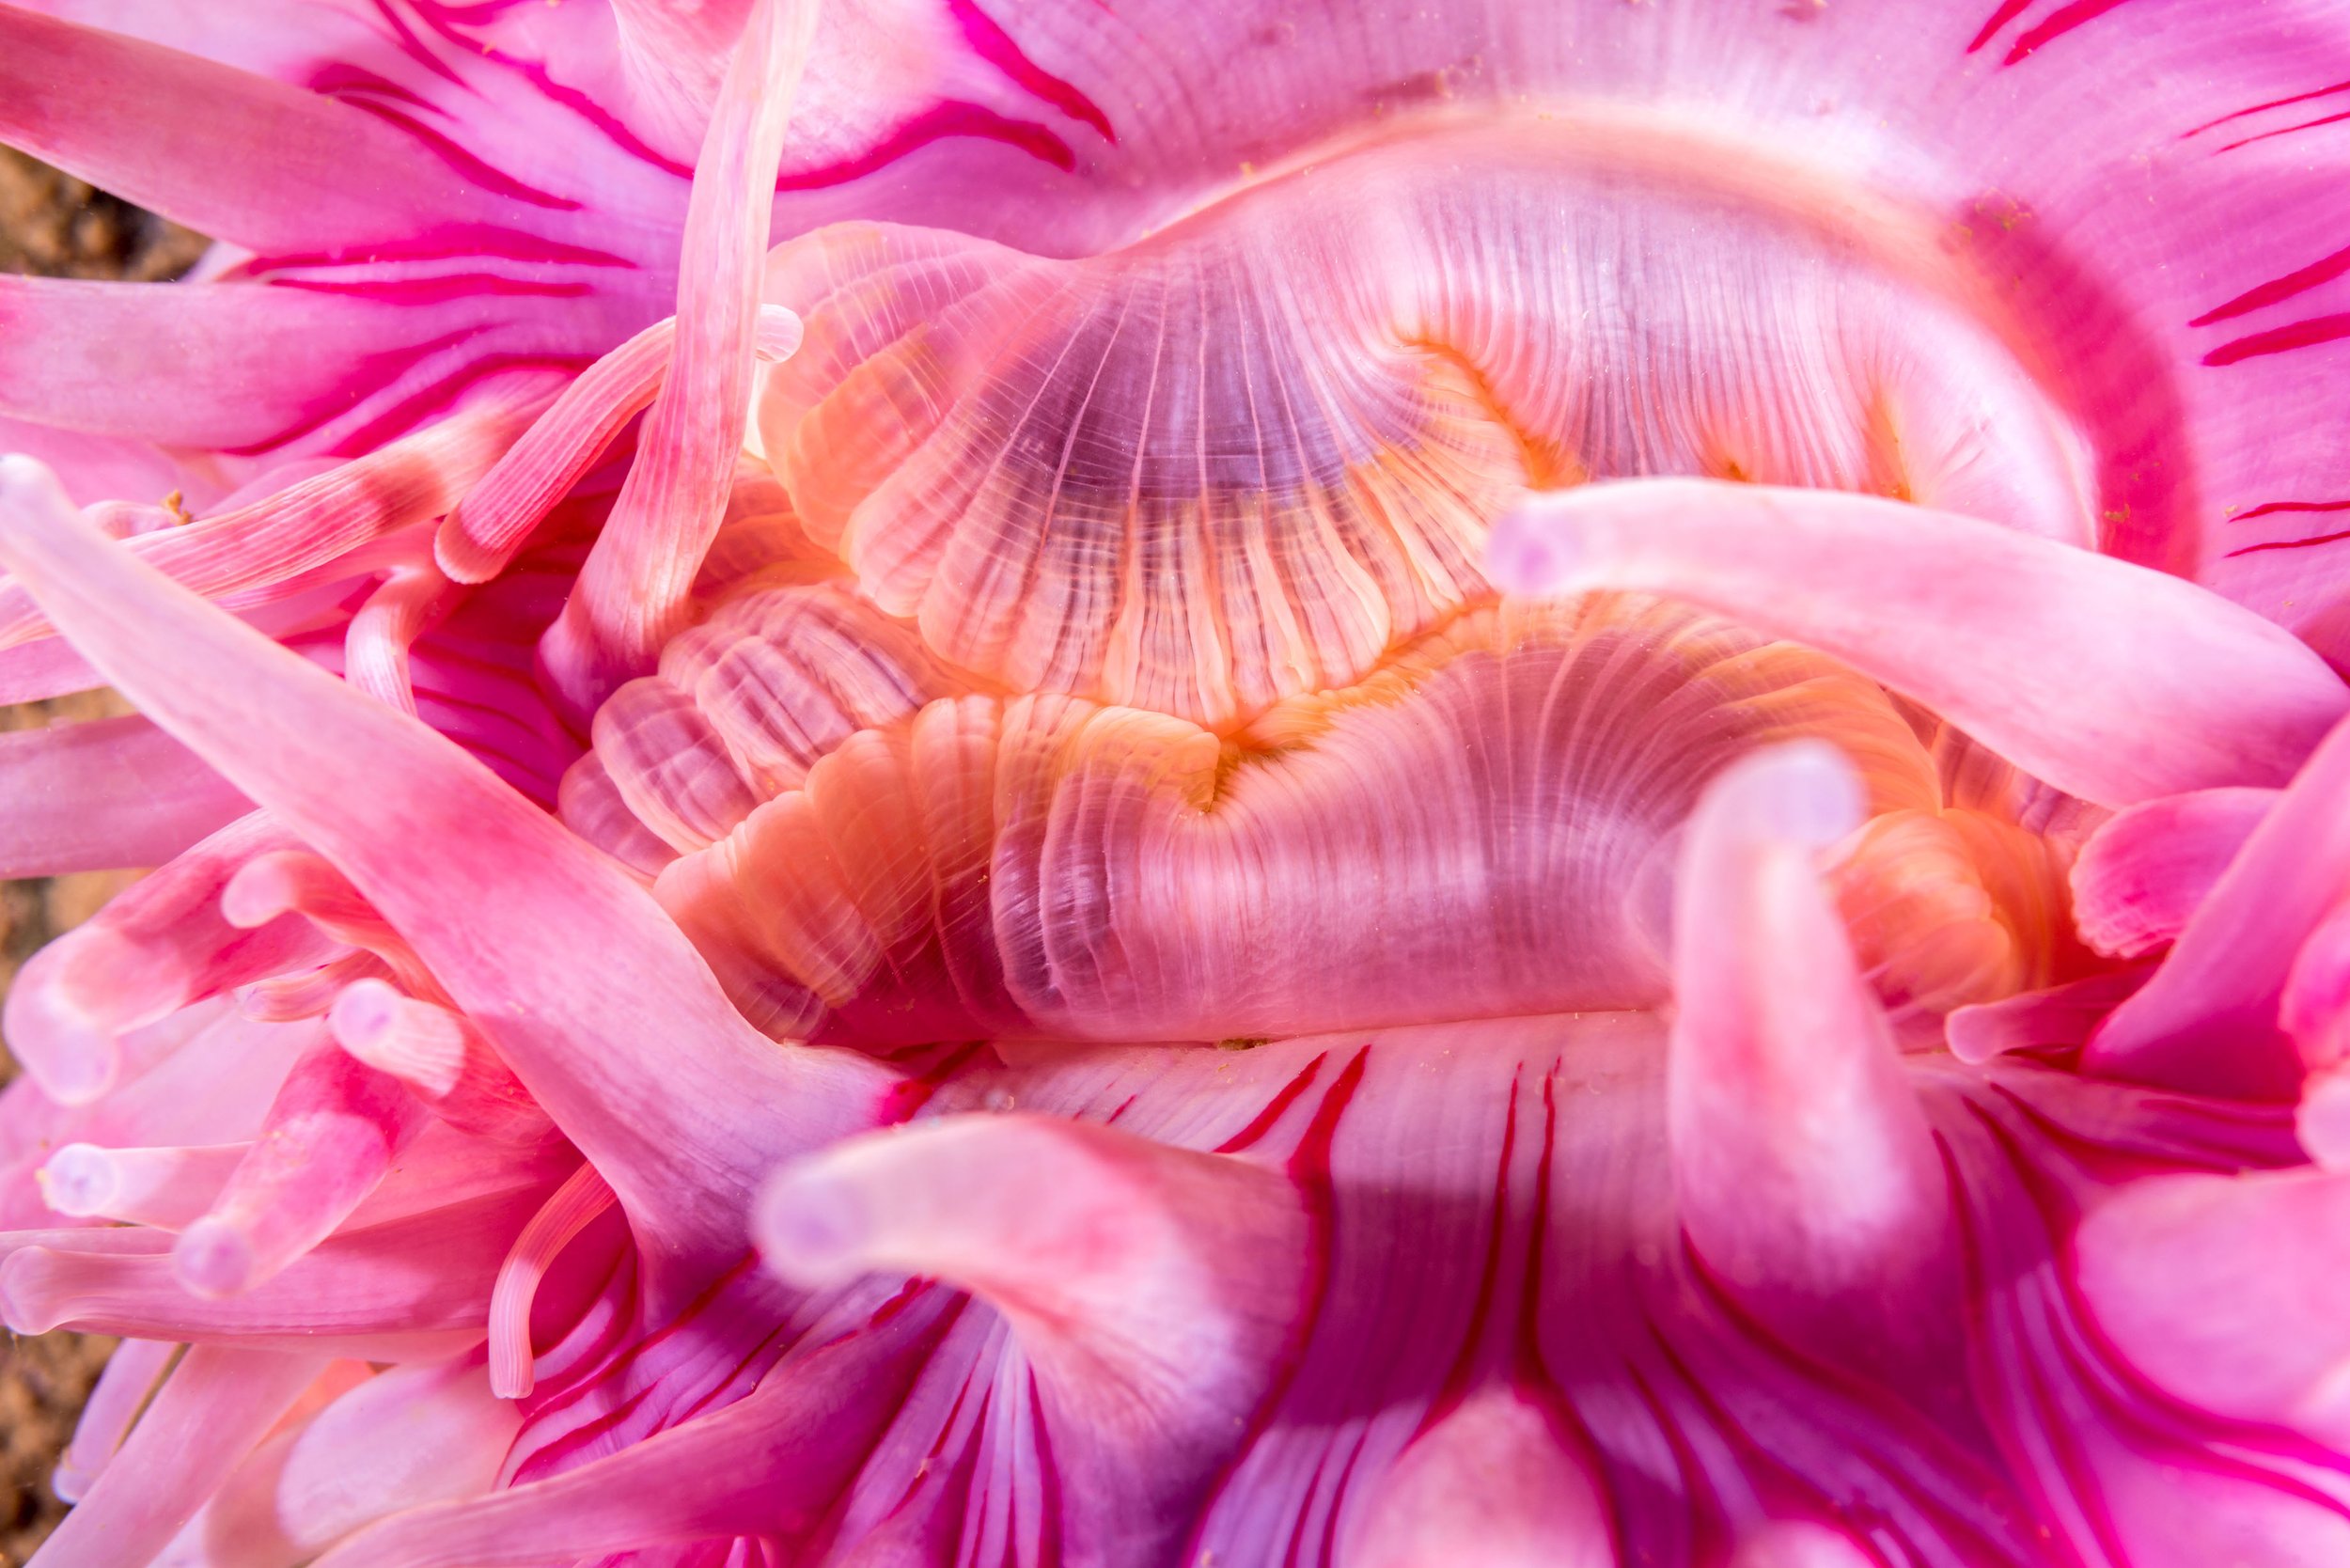 sea anemone detail of mouth 1.jpg